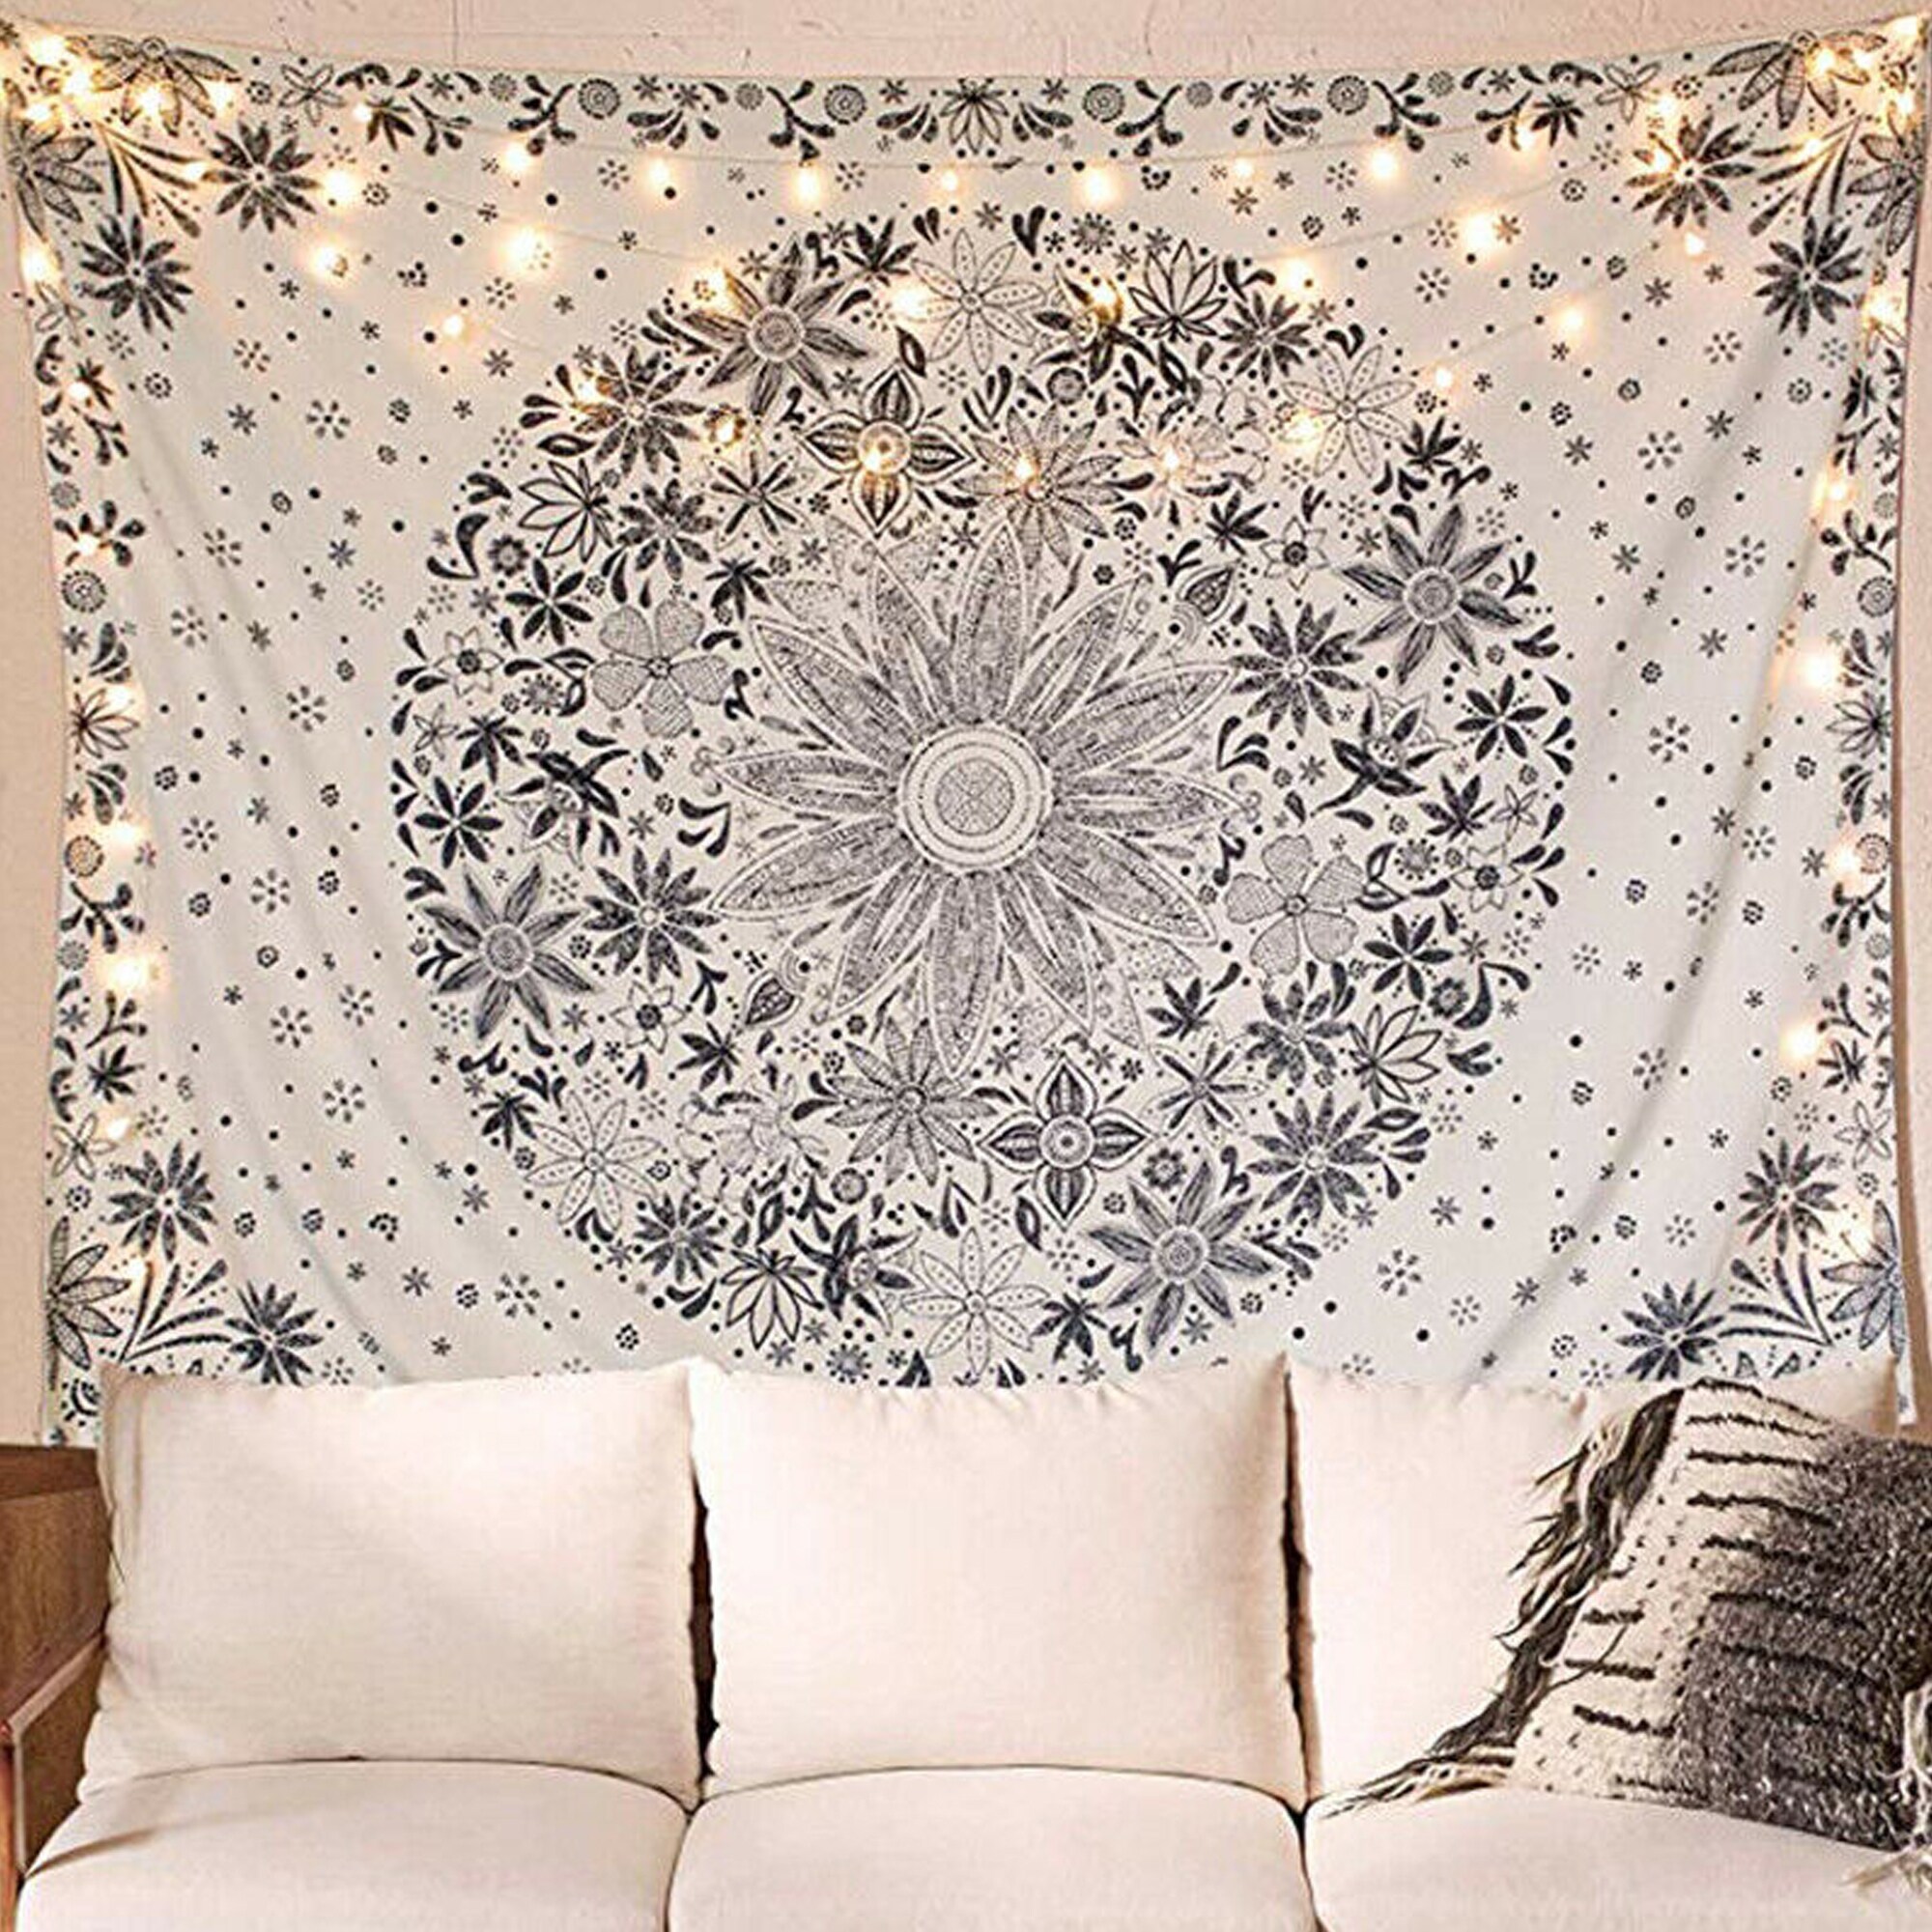 Floral Scenery Tapestry Wall Hanging Home Decor Bedspread Wall Blanket Art Decor 